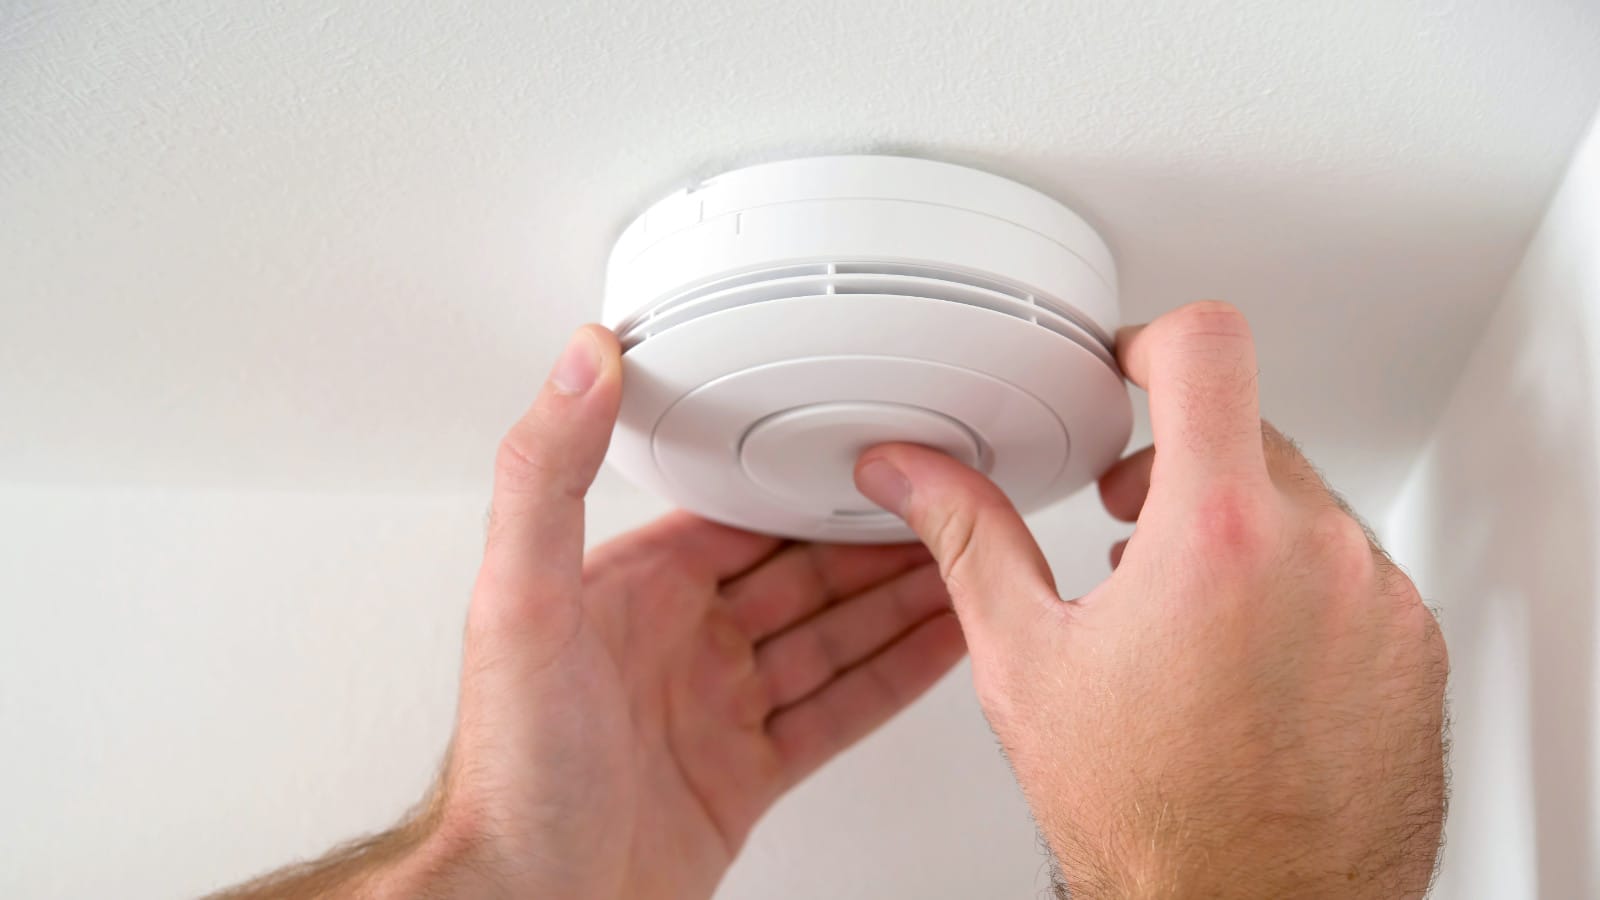 A person's hands installing a white carbon monoxide detector on a ceiling, emphasizing proper placement in a Rockwall, TX home for safety against gas leaks.